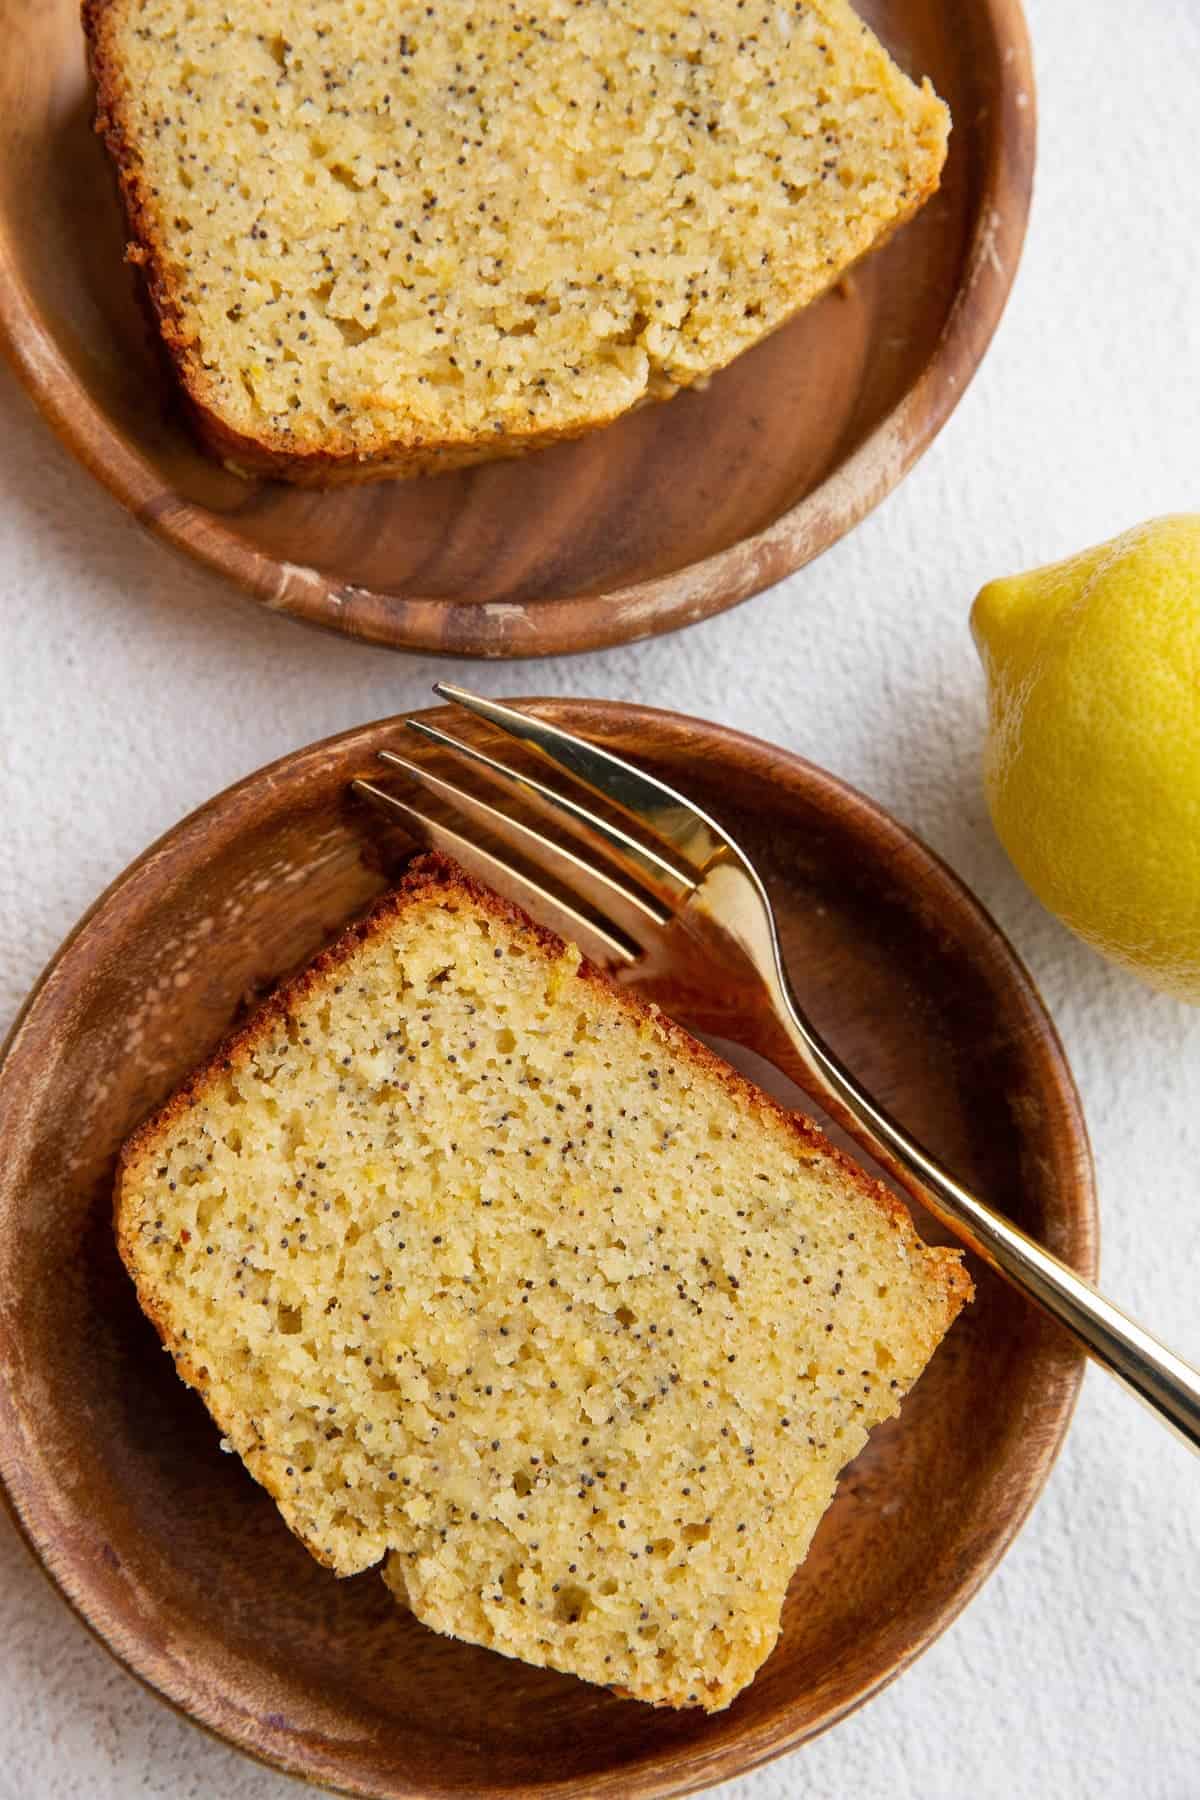 Almond flour lemon poppy seed bread on wooden plates with a gold fork.